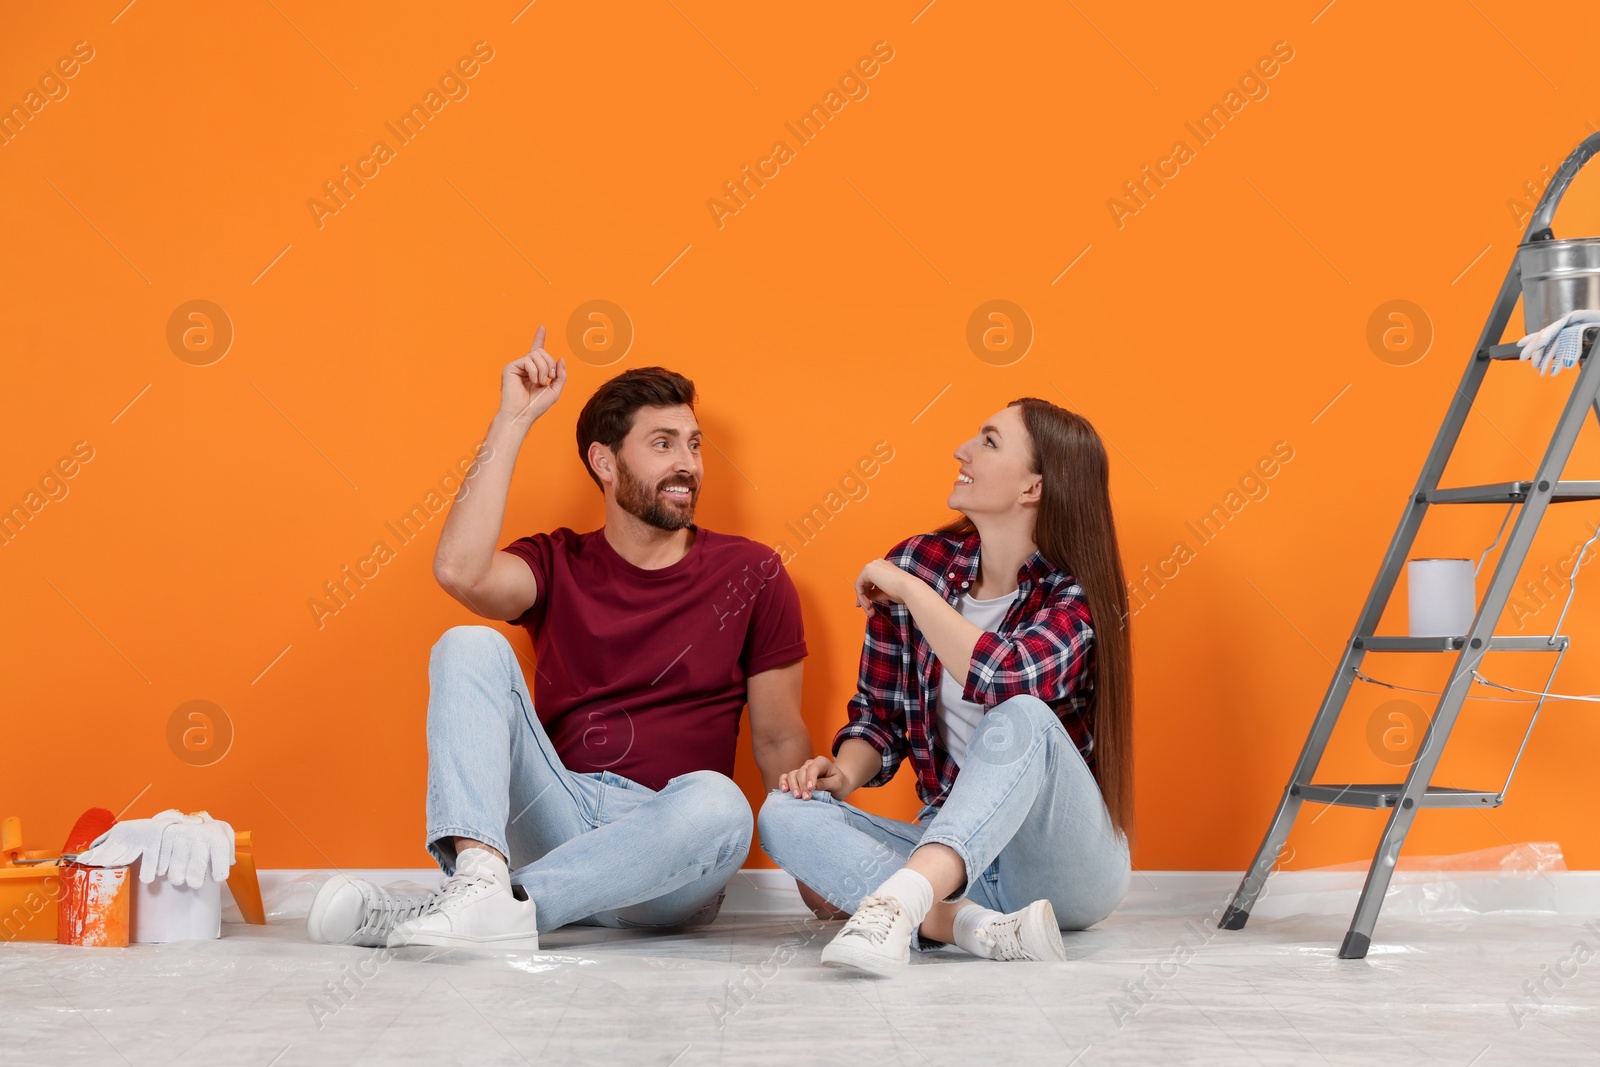 Photo of Man pointing upwards and woman sitting on floor near freshly painted orange wall indoors. Interior design